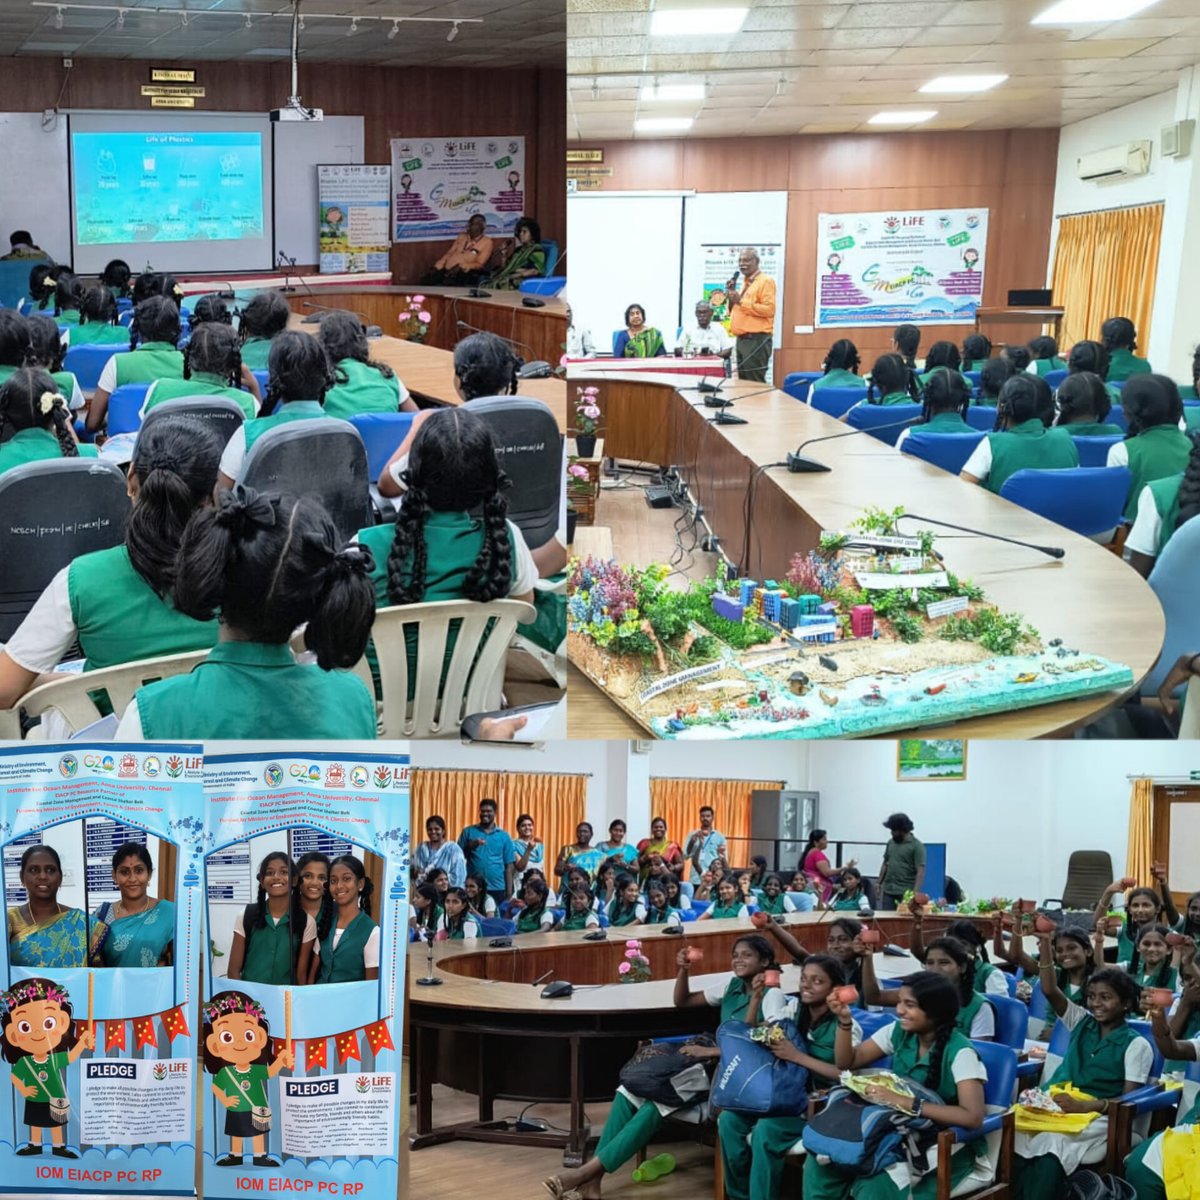 In commemoration of 'Earth Day 2024', IOM EIACP PC RP Chennai organized a mass awareness event on 'Mission LiFE and Video session on Plastics and the environment' at IOM Koodal Hall on 24.04.2024. A total of 80 students and 10 staff members were sensitised in this event.